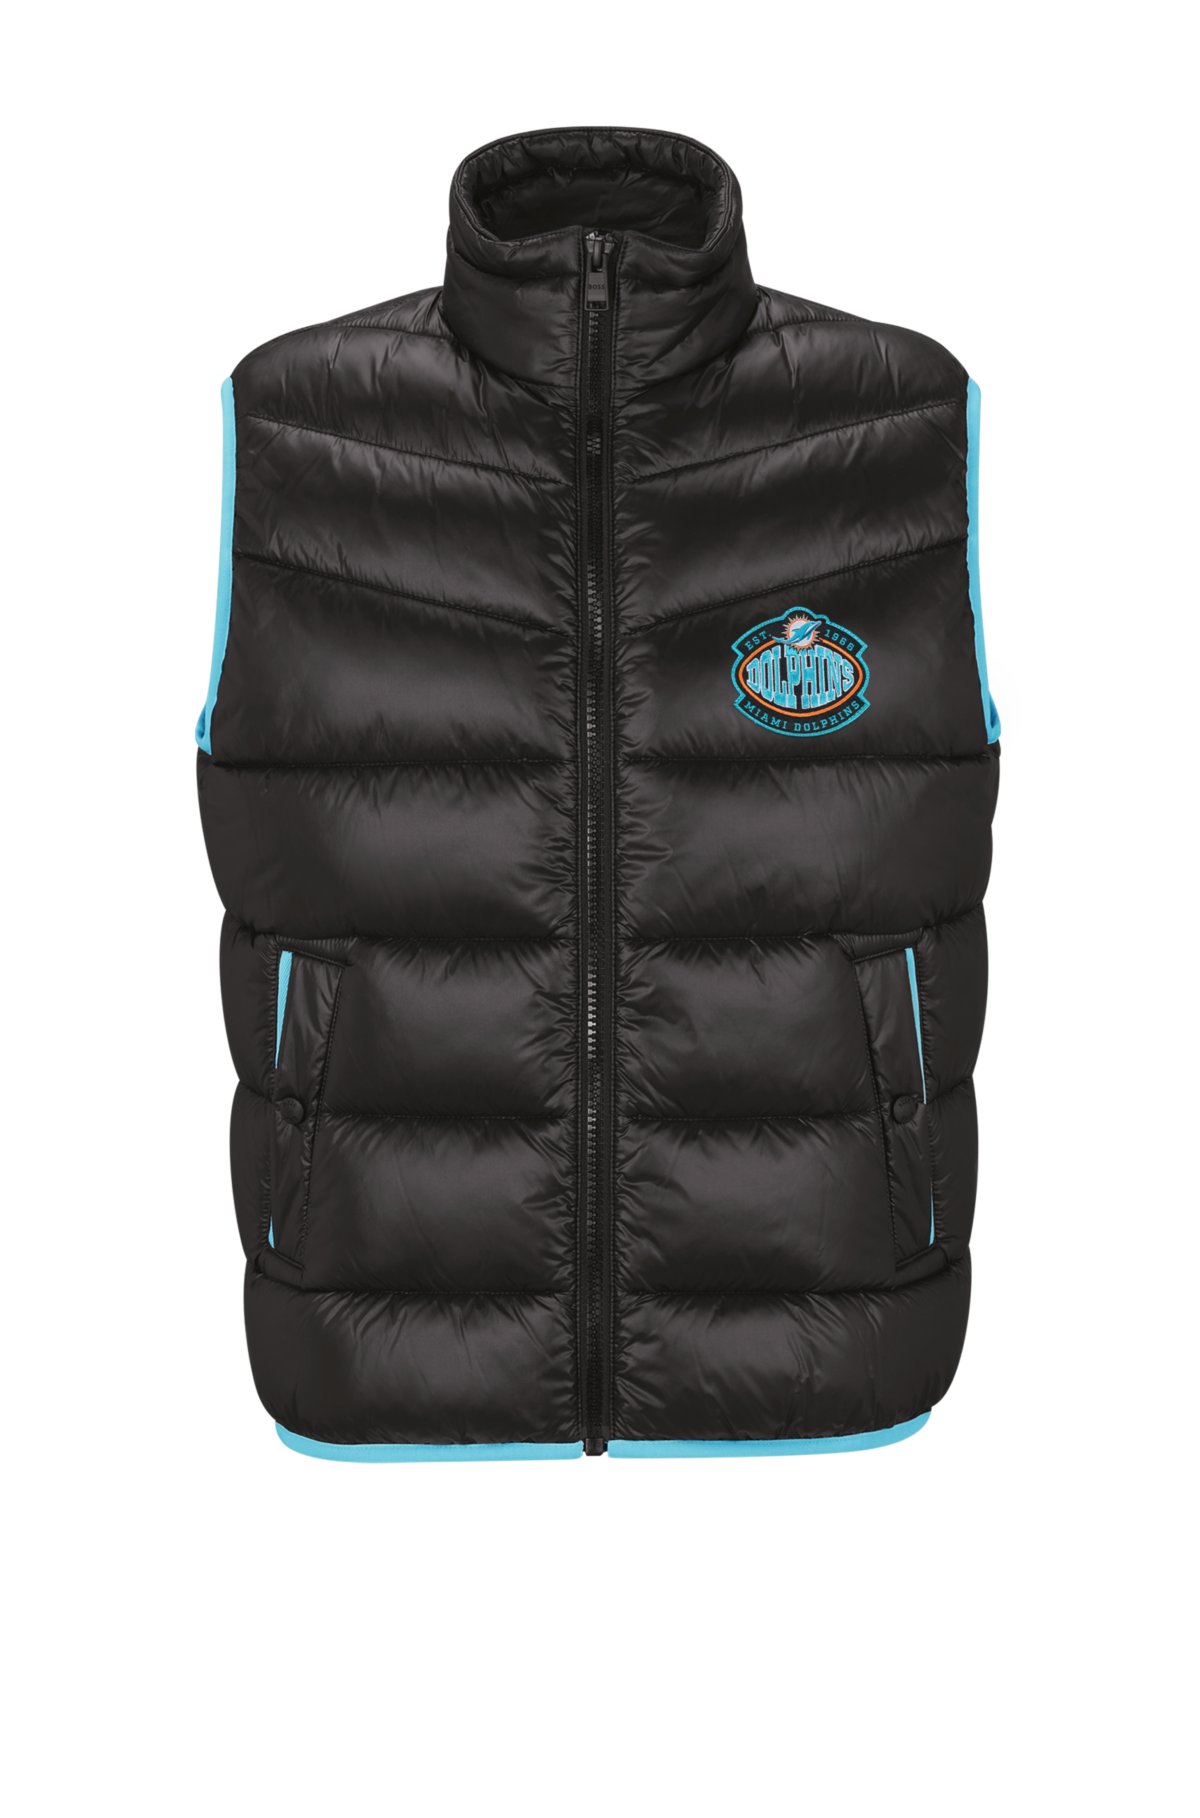  BOSS x NFL water-repellent padded gilet with collaborative branding, Dolphins